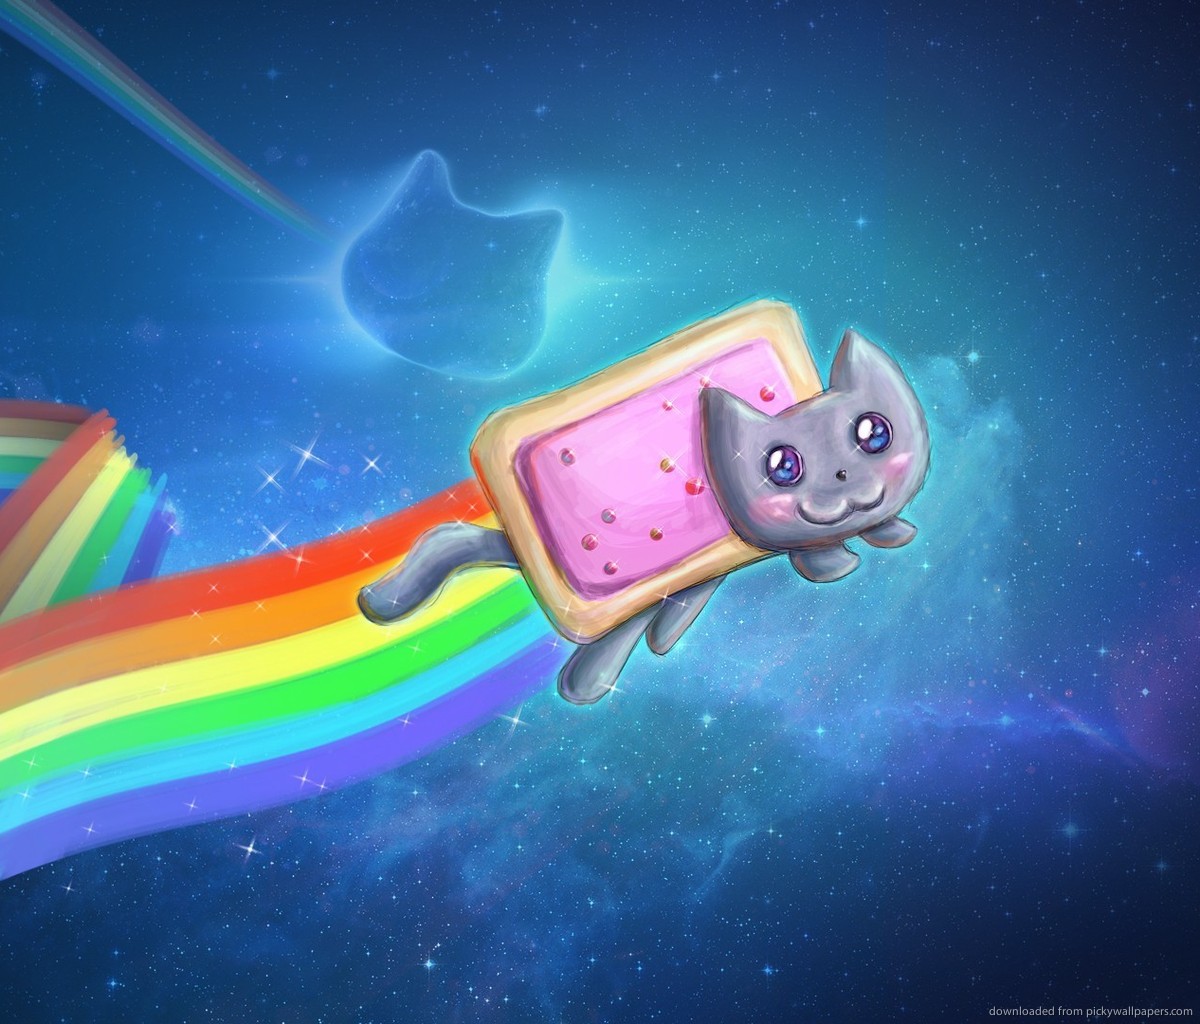 Featured image of post Iphone Wallpaper Galaxy Cat / Download, share or upload your own one!